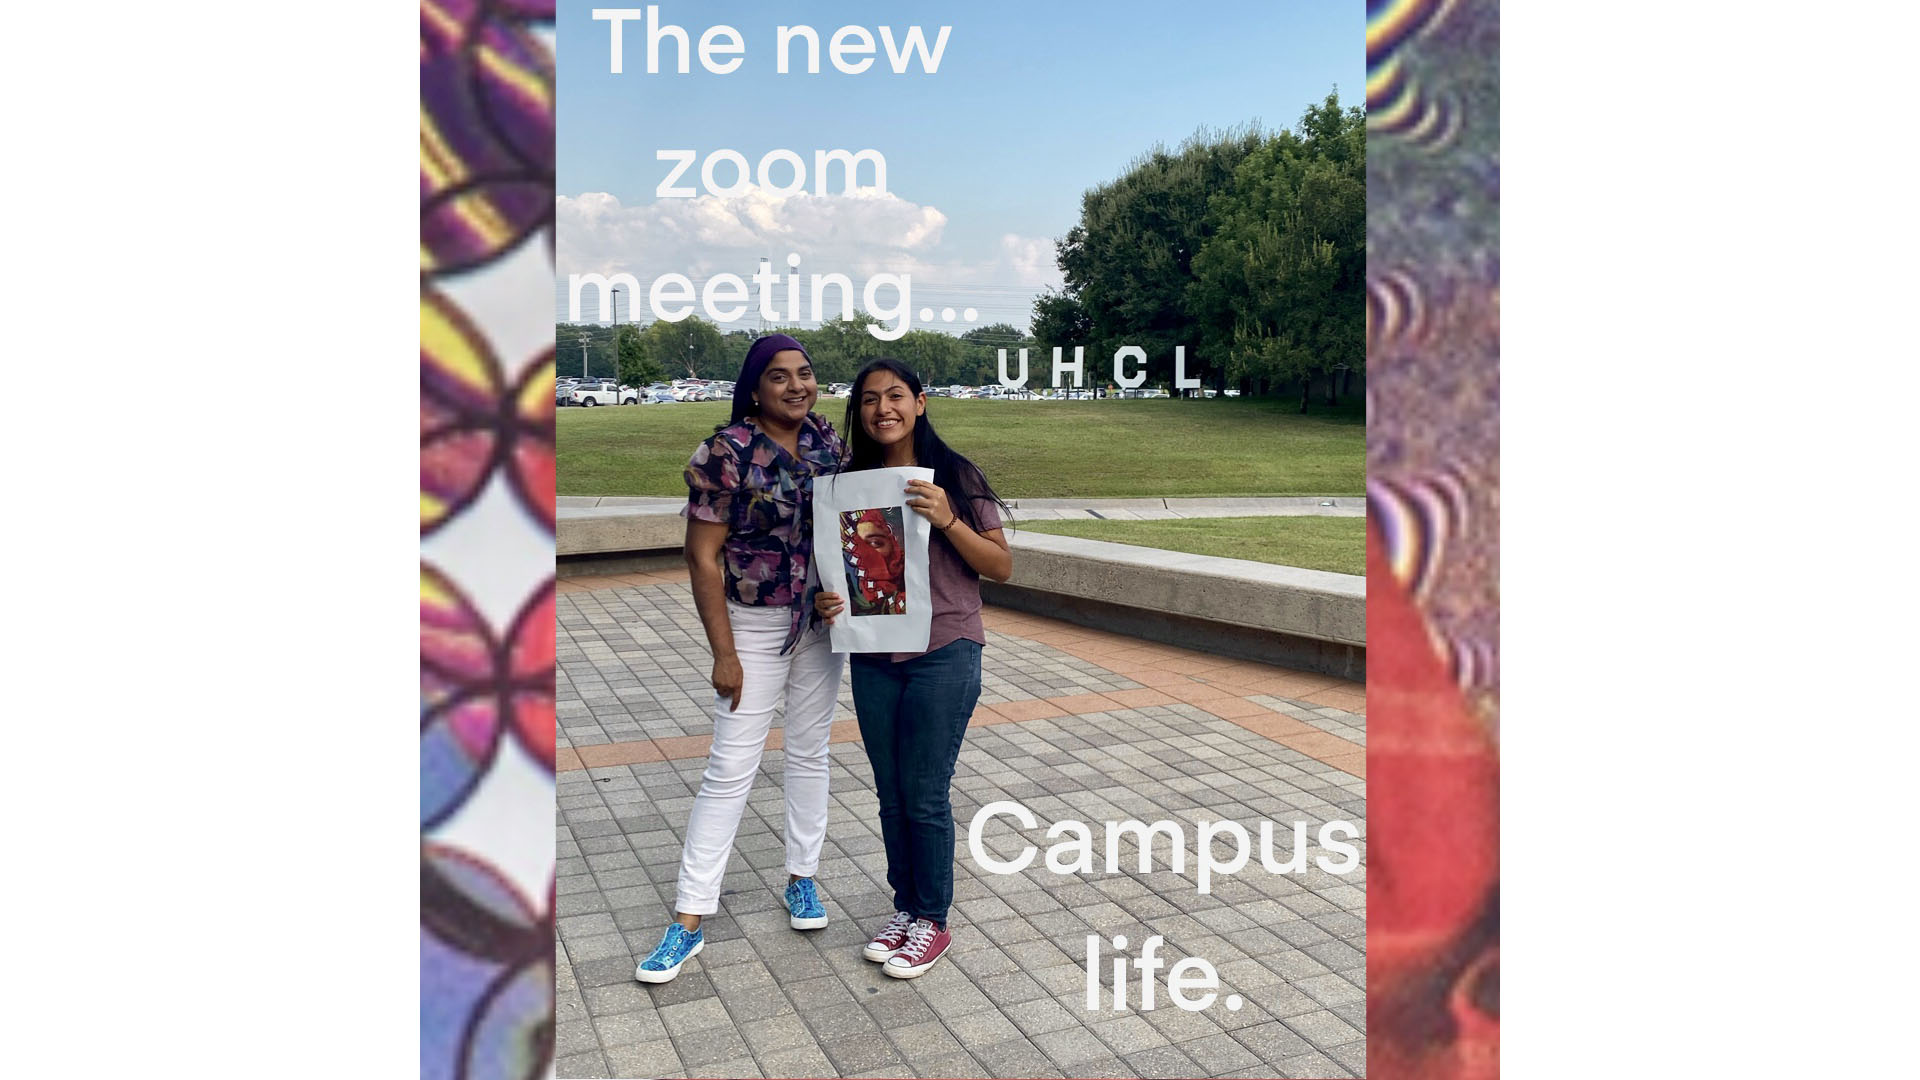 Title: The new zoom meeting. Campus. Two students pose for a picture on campus.